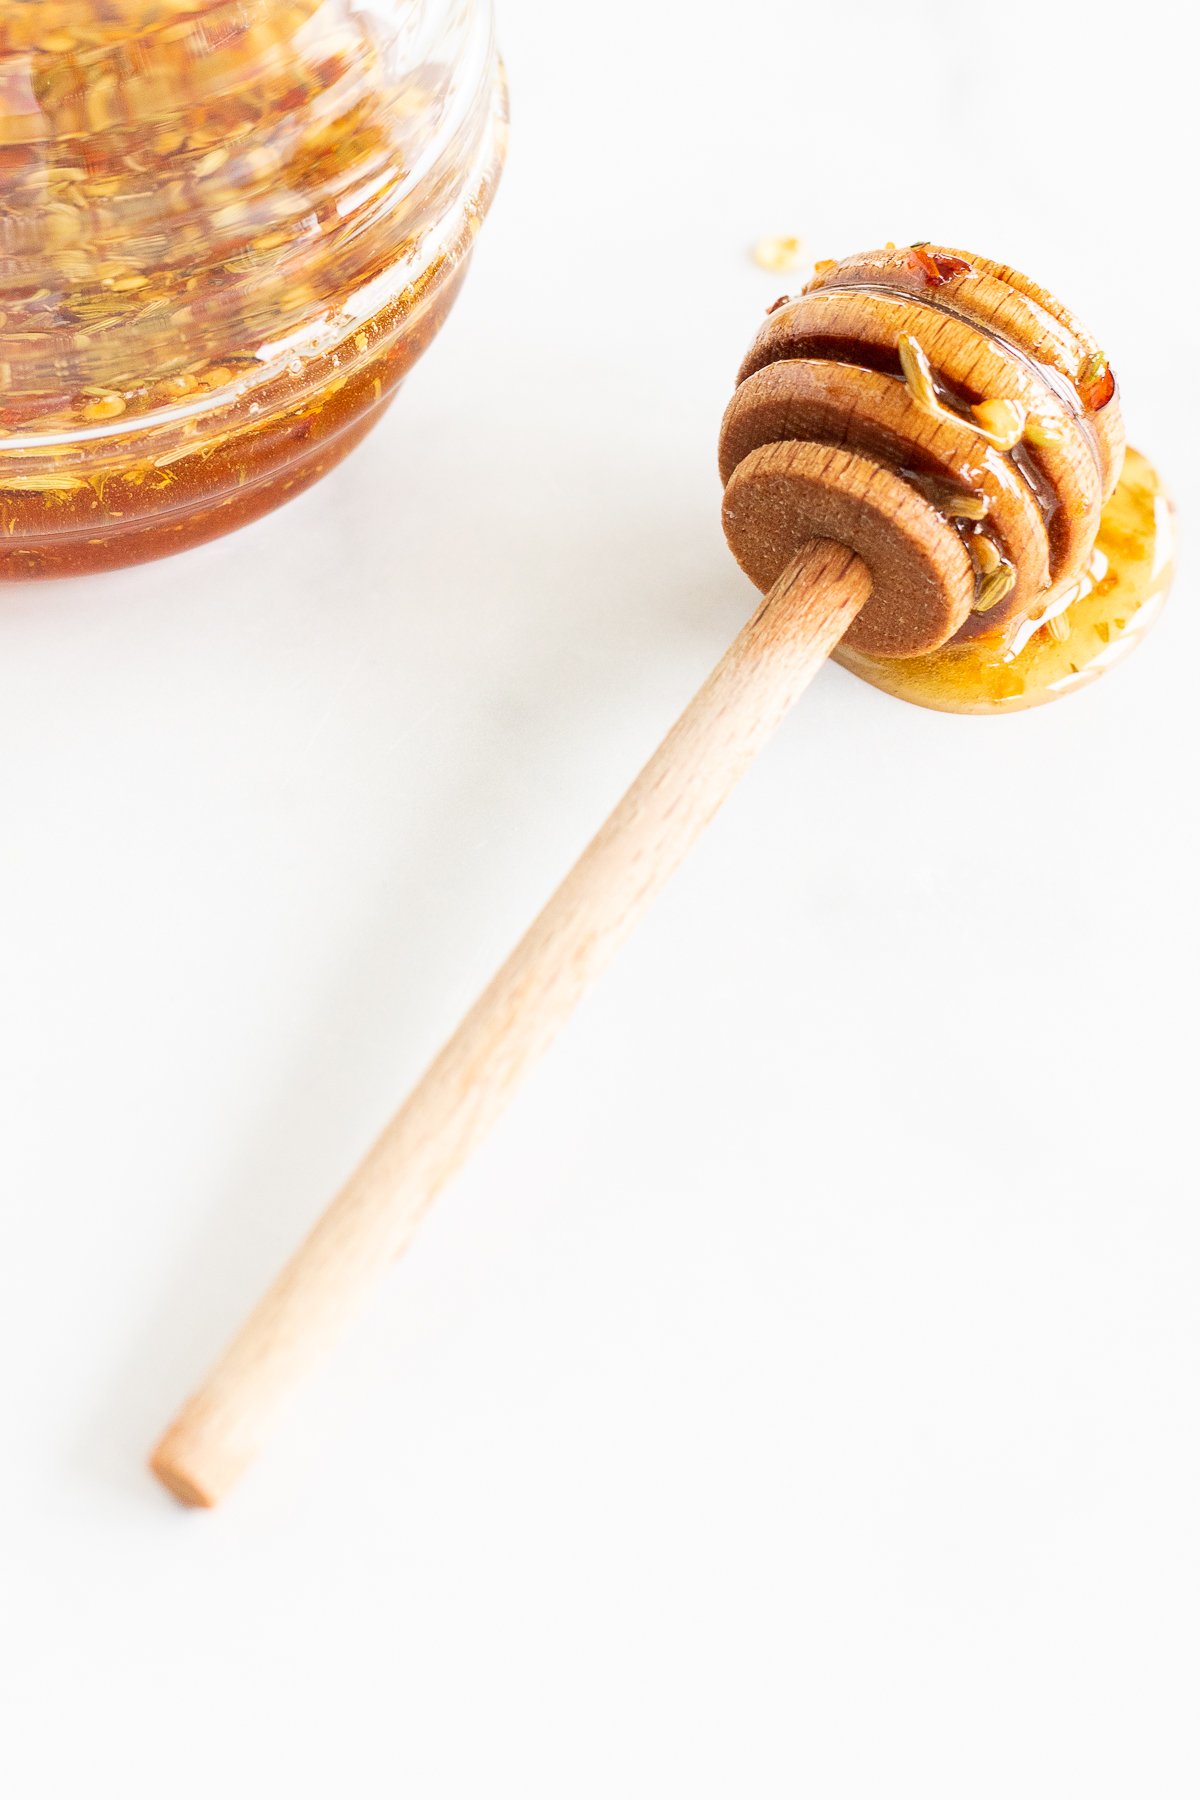 A wooden spoon with honey on it next to a glass jar of hot honey.